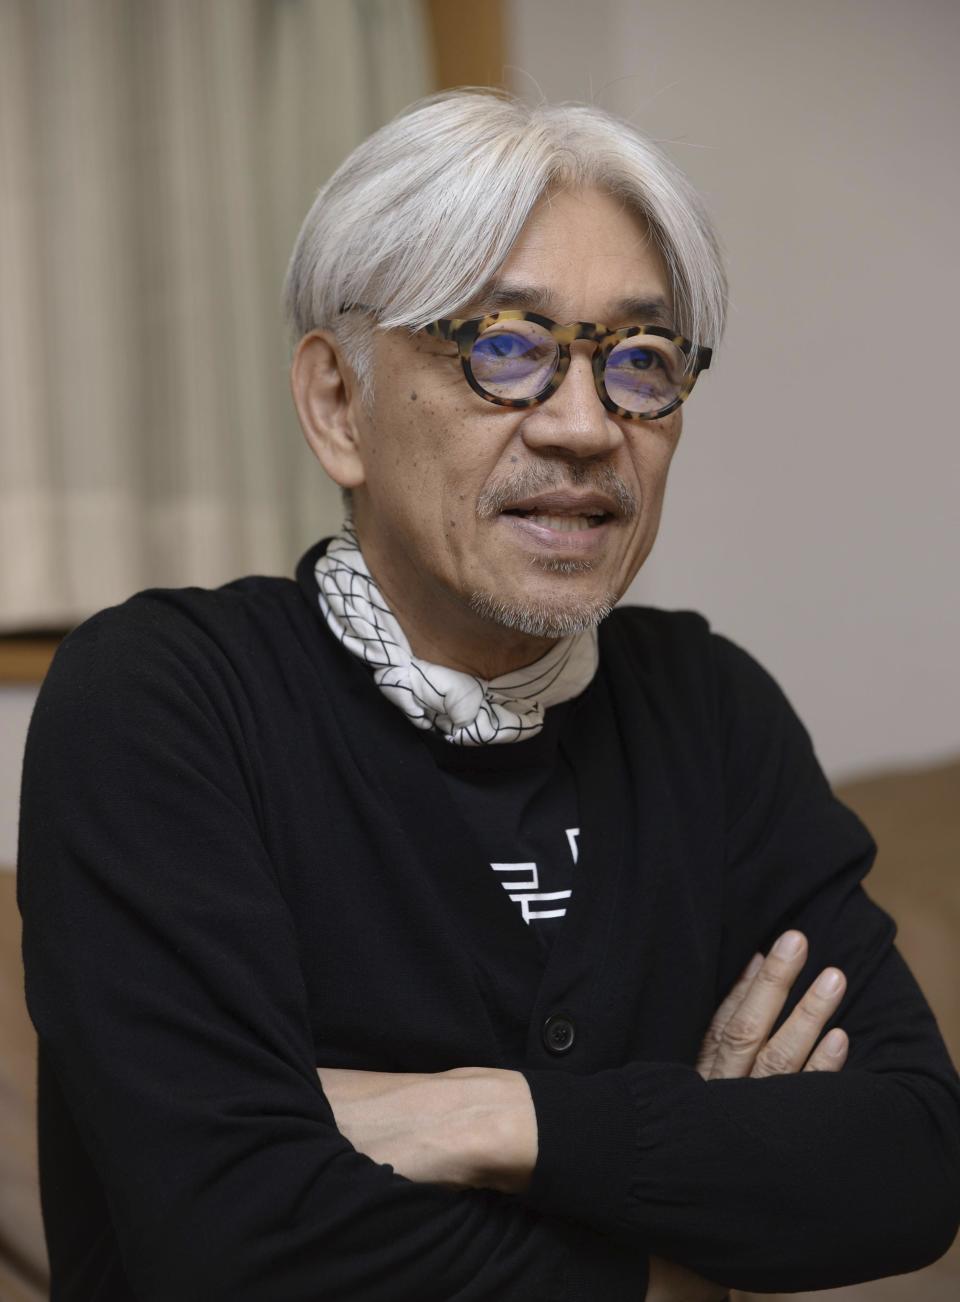 Ryuichi Sakamoto speaks in an interview in Tokyo, Japan, March, 2017. Japan's recording company Avex says Sakamoto, a musician who scored for Hollywood movies such as “The Last Emperor” and “The Revenant,” has died. He was 71. He died March 28, according to the statement released Sunday, April 2, 2023. (Kyodo News via AP)